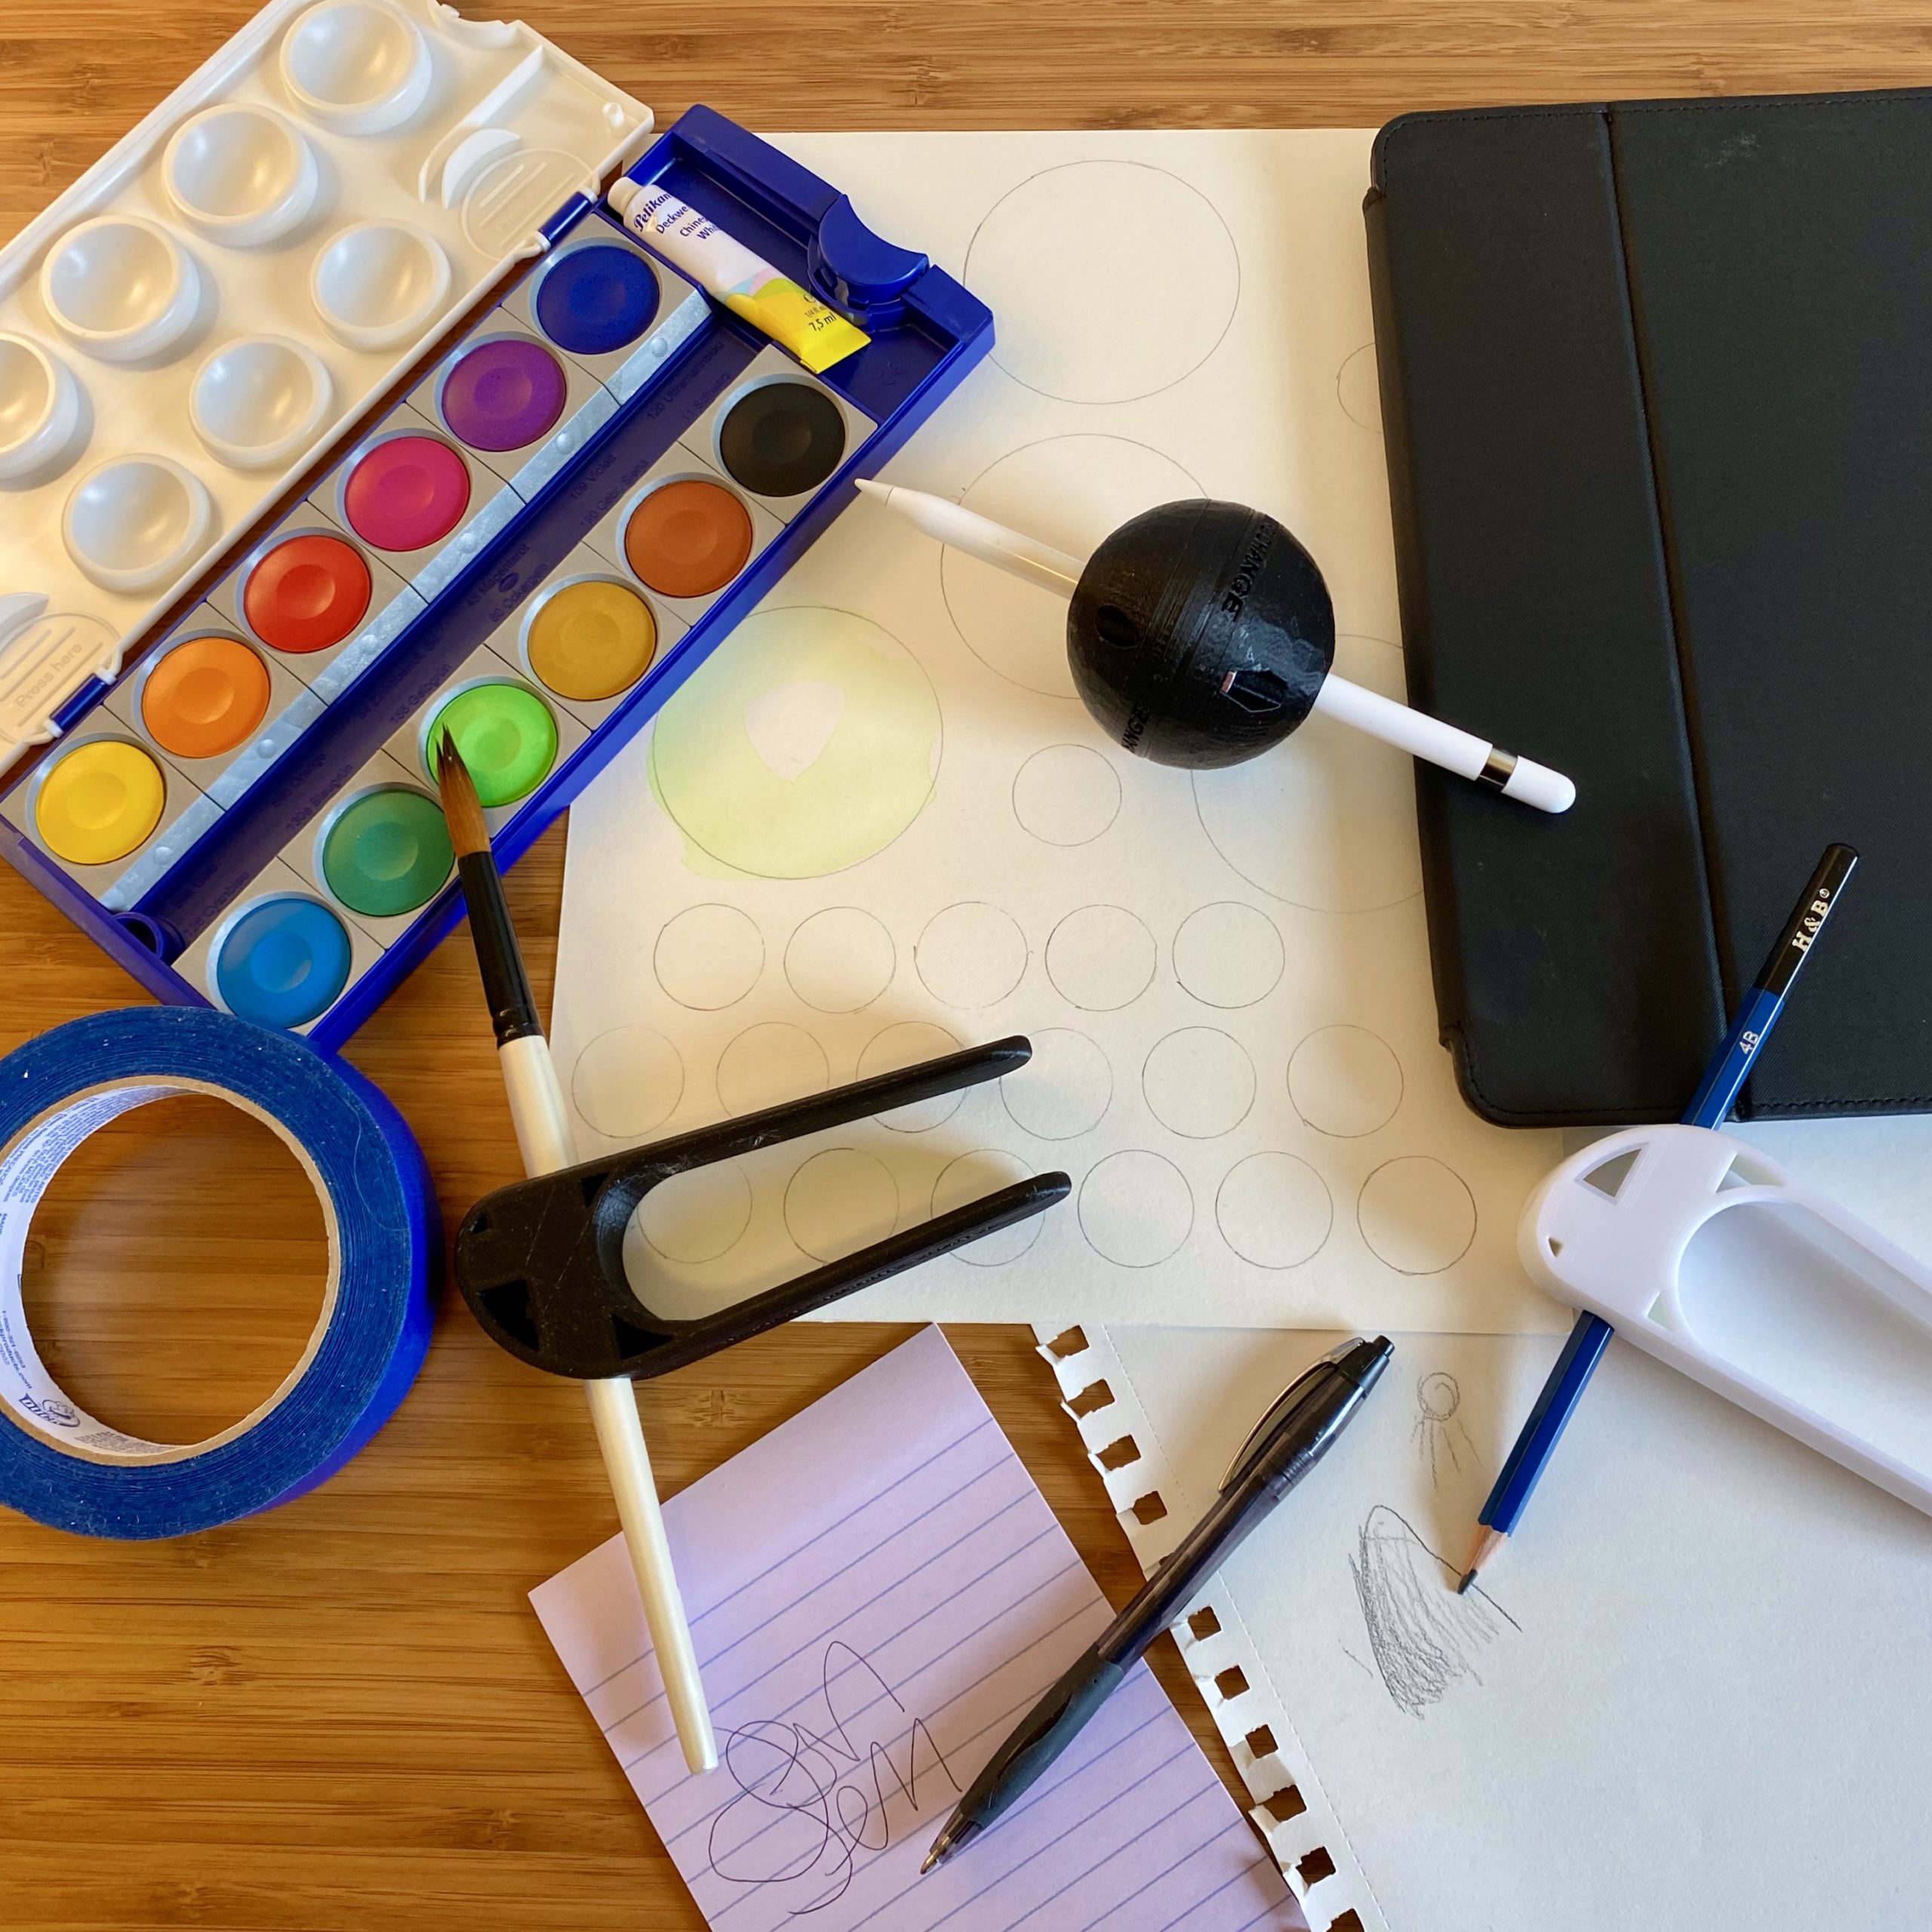 A watercolor paint palette, a Pen Ball device holding an Apple Pencil, a piece of watercolor paper, an iPad, a Palm Pen Holder device holding a blue drawing pencil pointing to a piece of sketch paper and small sketch of a hill and sunshine, a lined piece of paper with writing on it next to a pen, another Palm Pen Holder holding a paintbrush, and a roll of blue painters tape.  All of the items are on top of a wooden desk and the photo was taken from above.